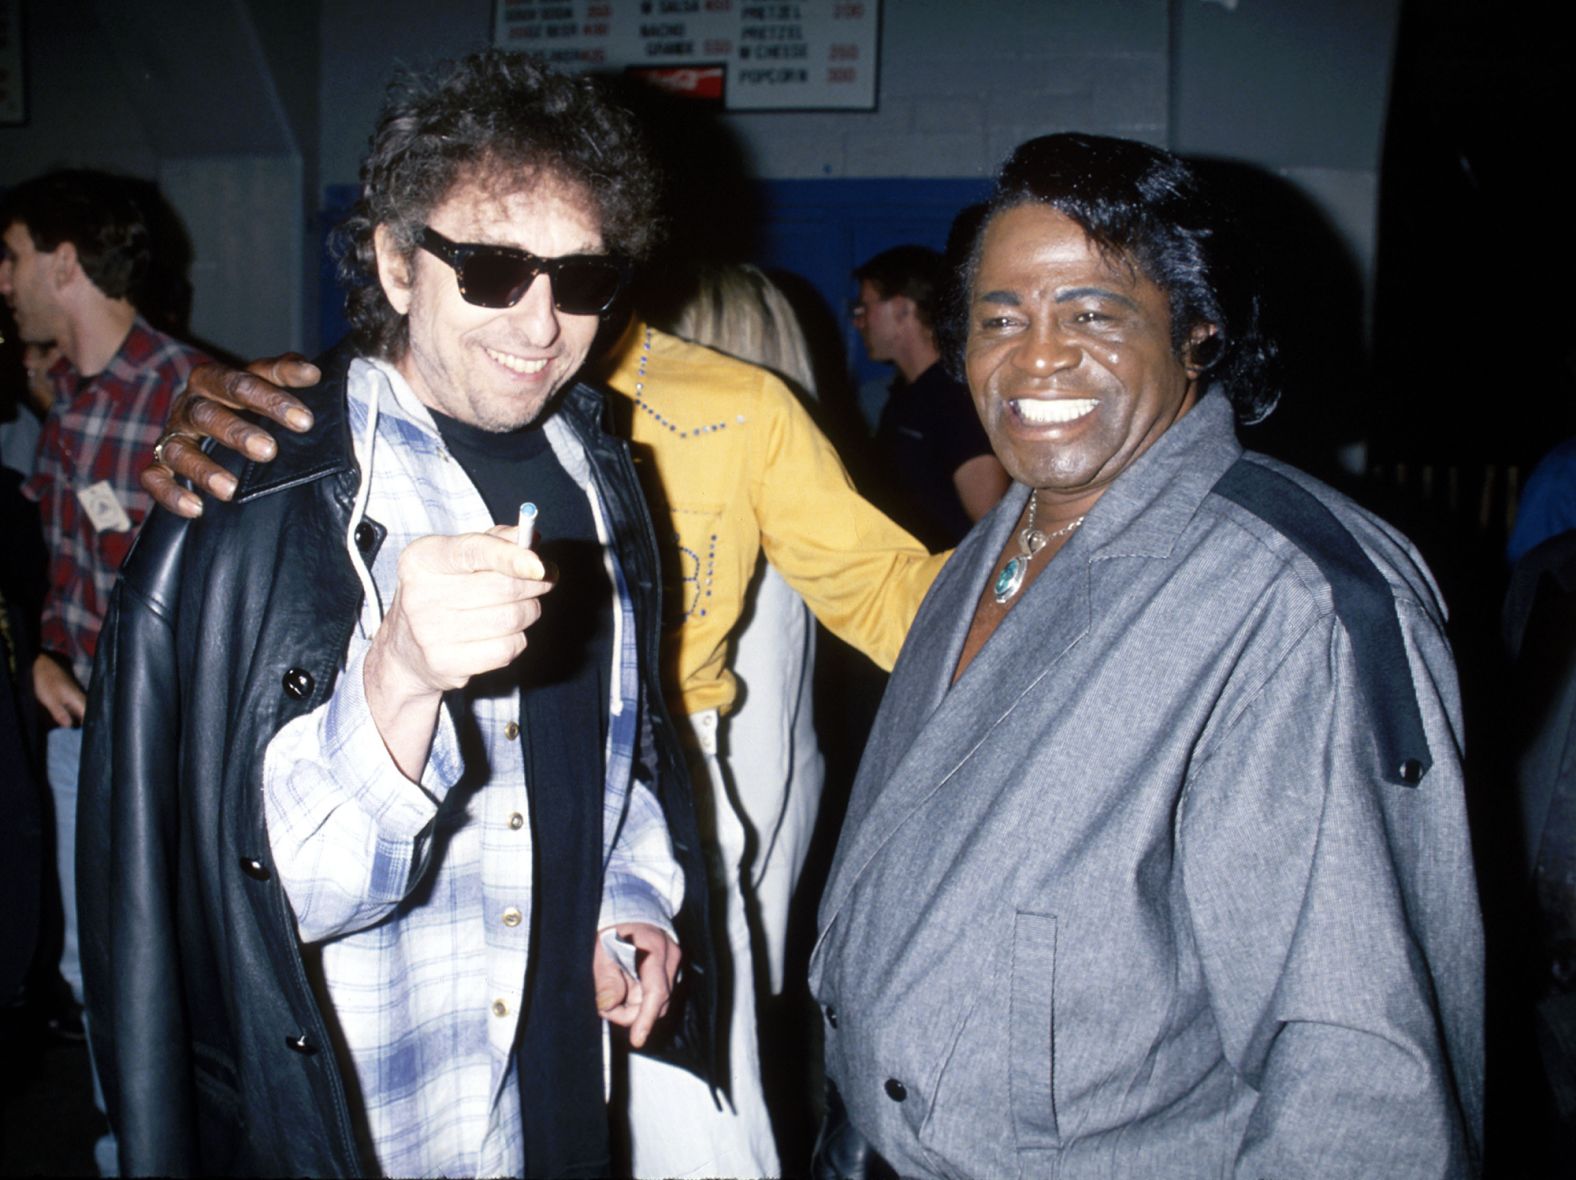 Dylan talks with James Brown, "The Godfather of Soul," in 1990.